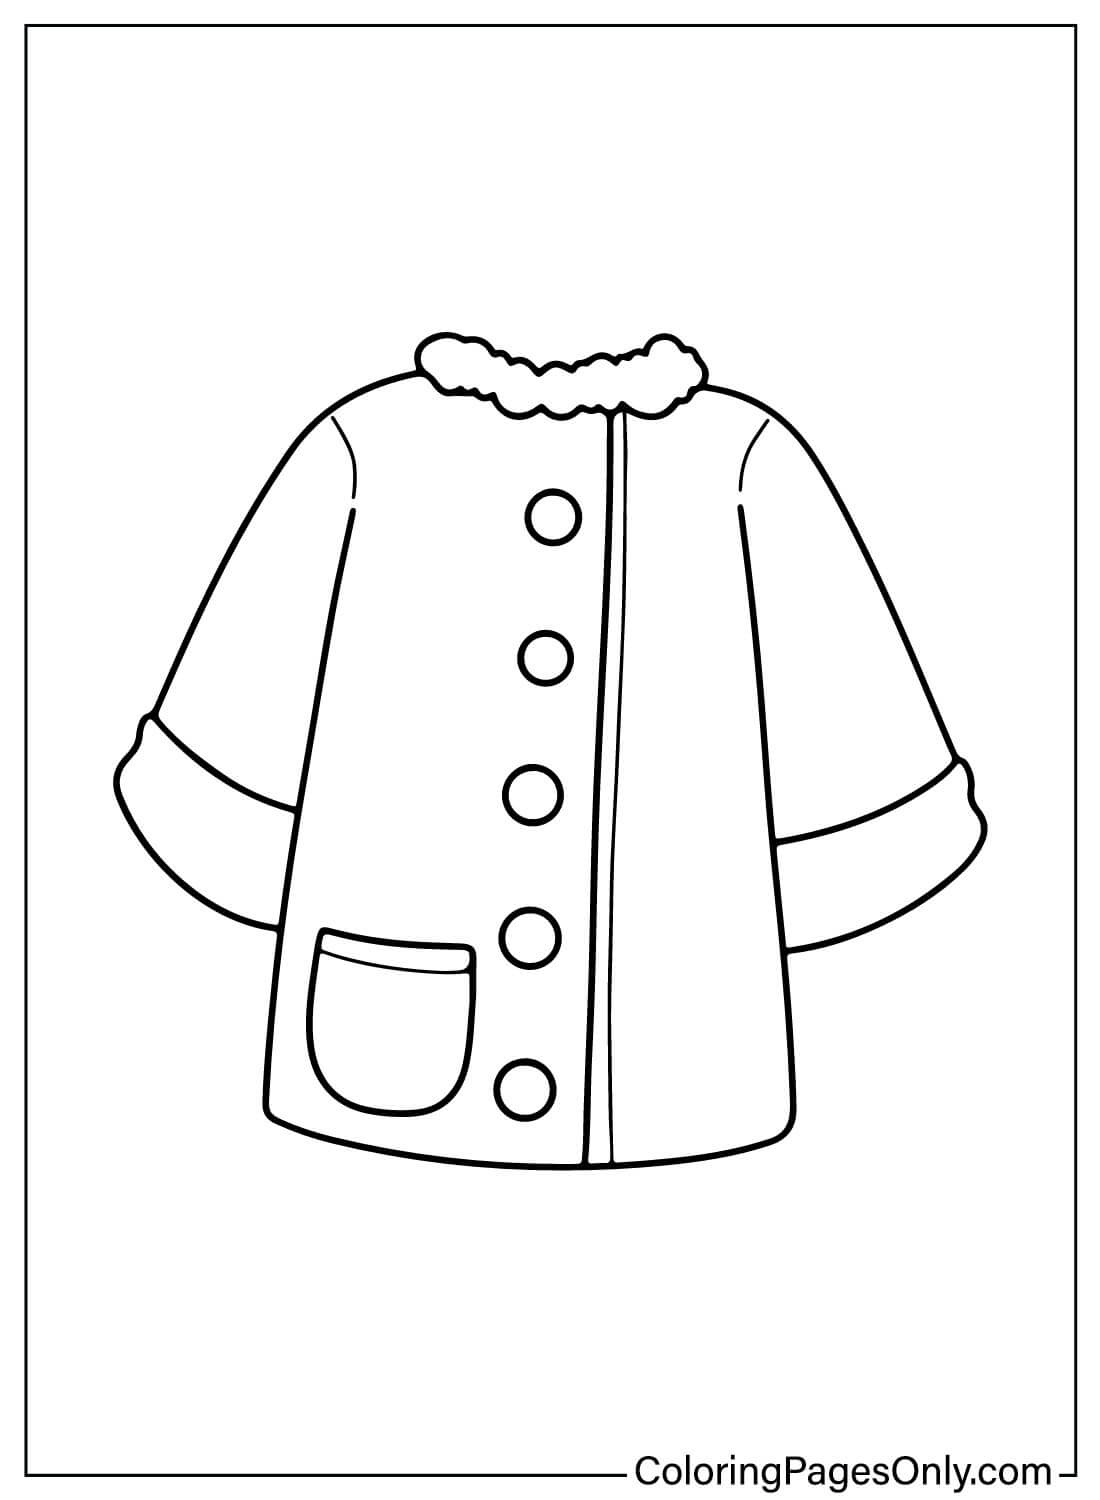 Baby Clothes Coloring Pages Printable - Free Printable Coloring Pages